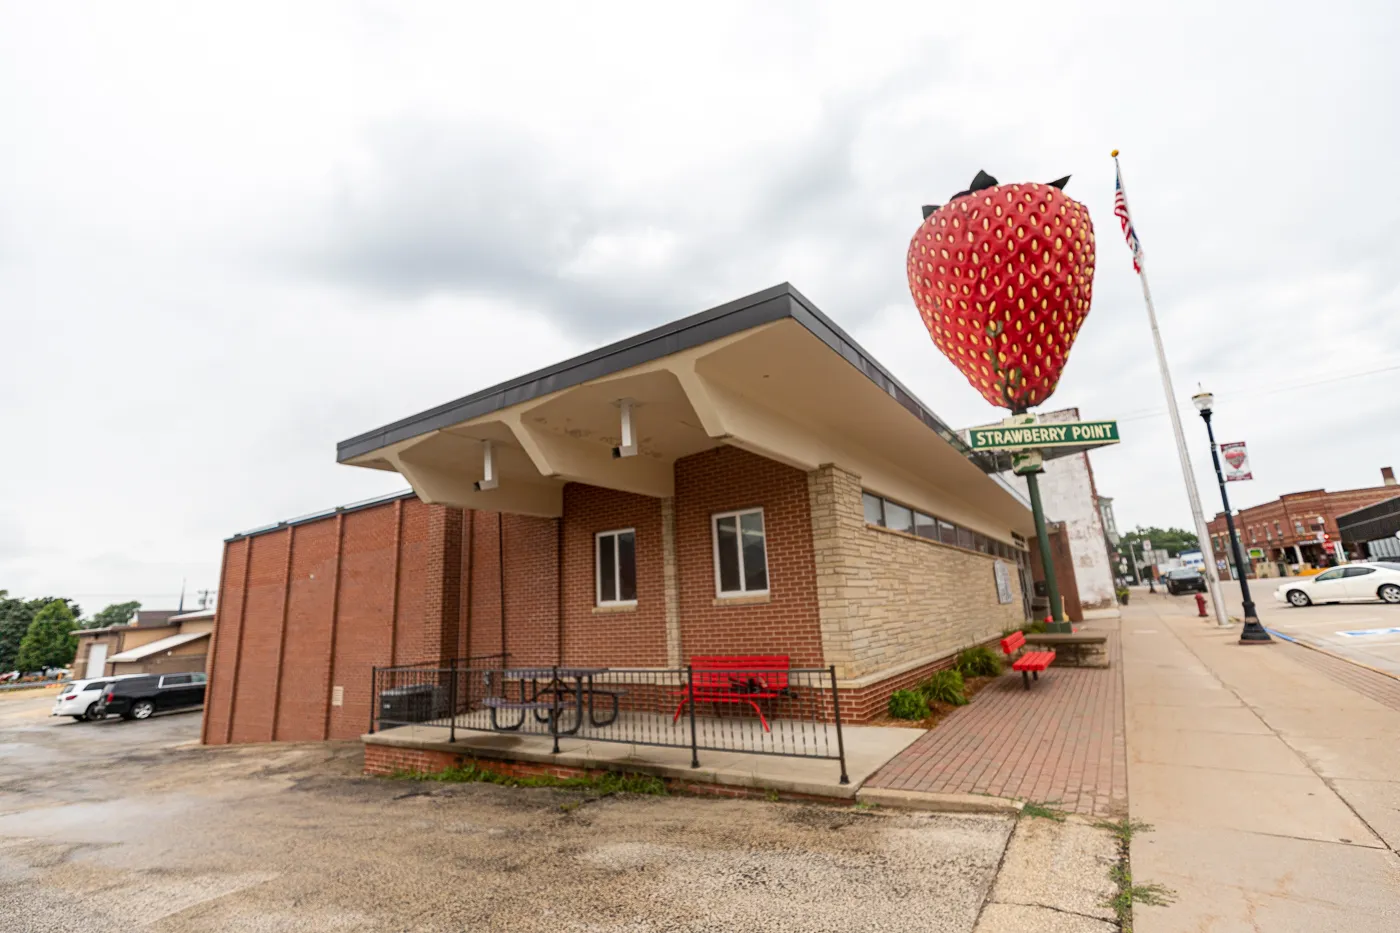 The World's Largest Strawberry in Strawberry Point, Iowa - The Best Iowa Roadside Attractions